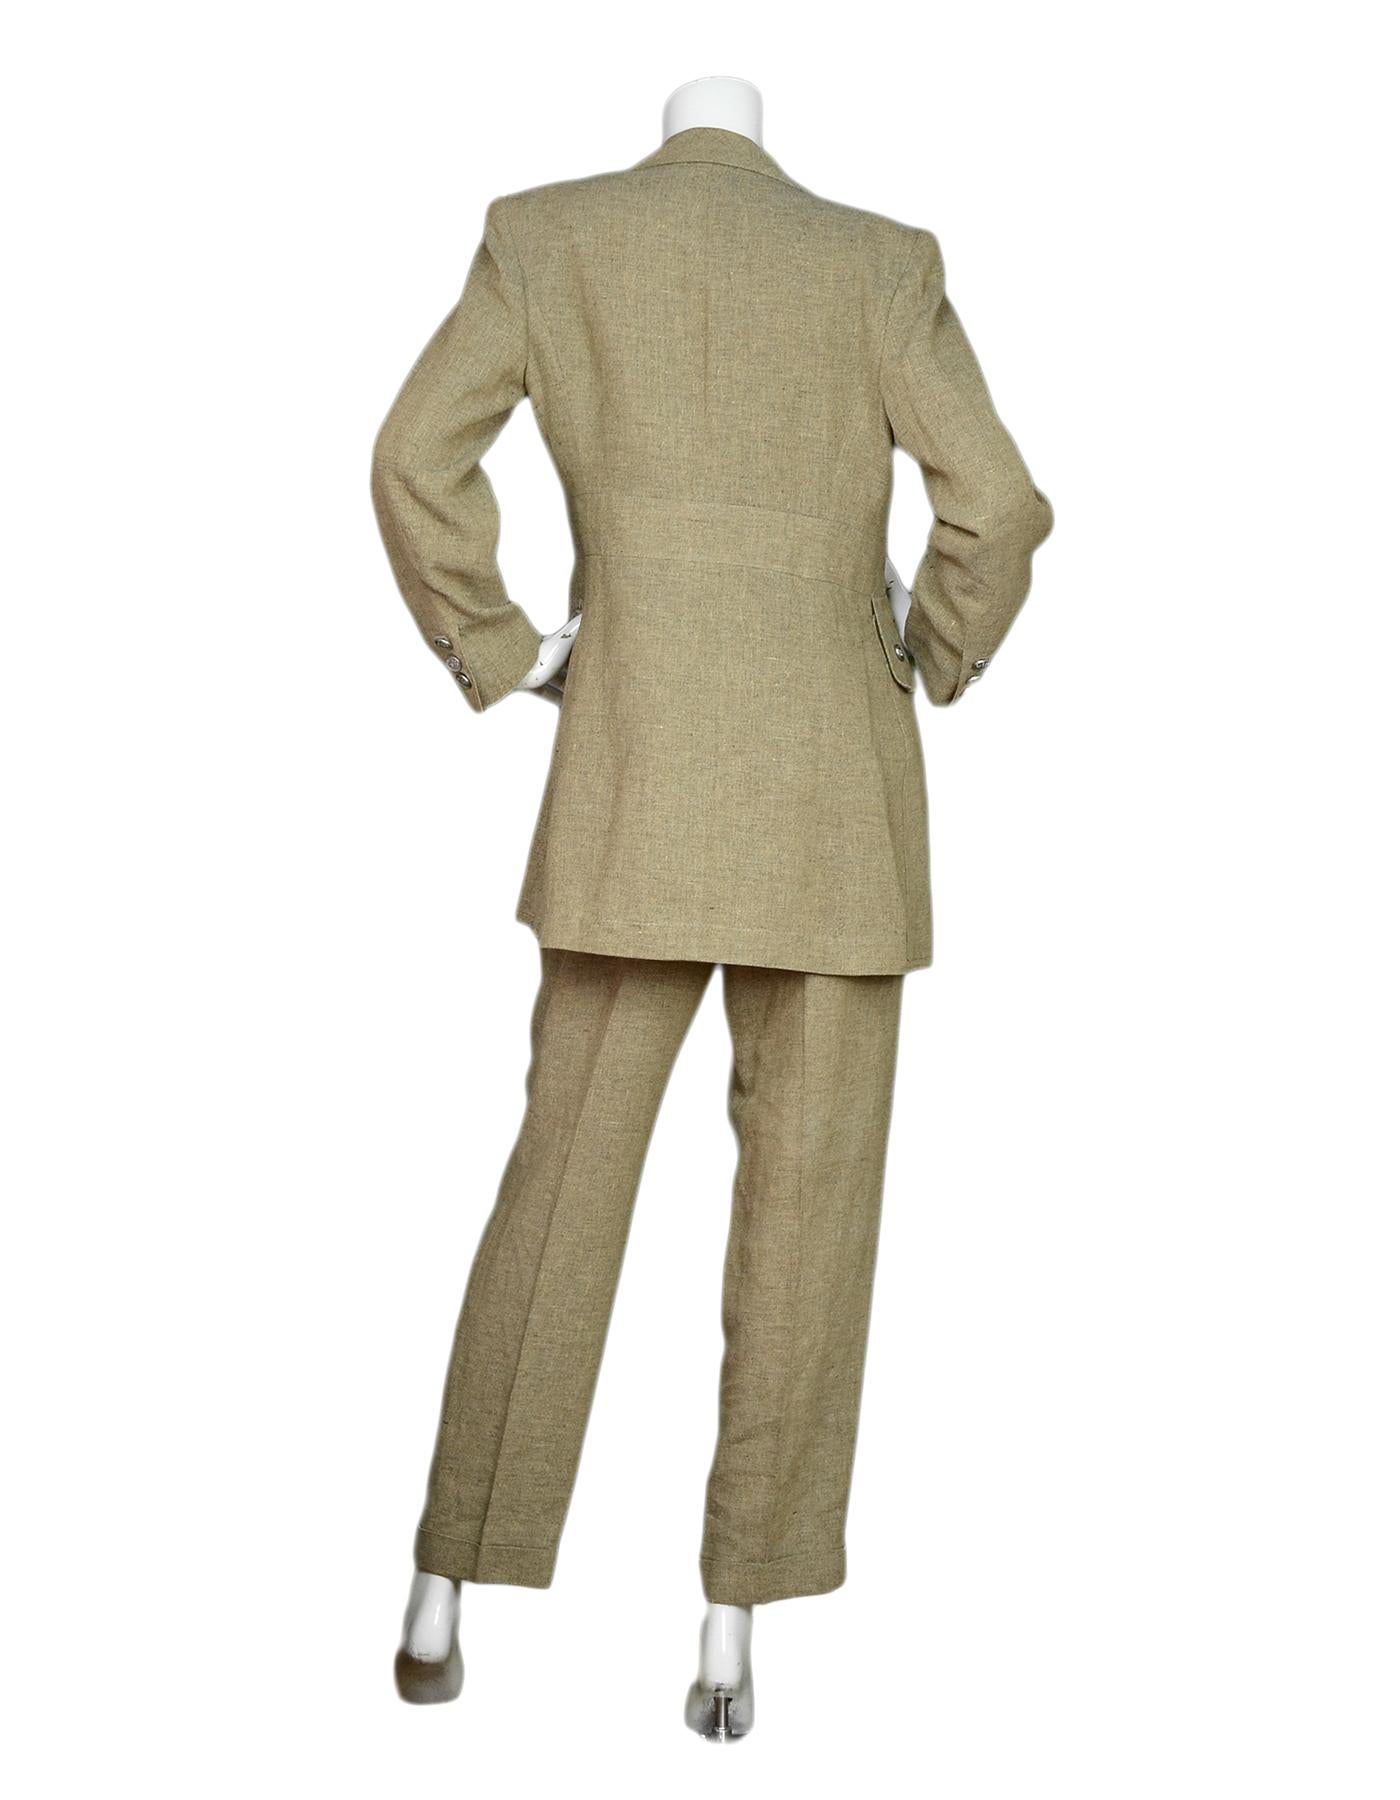 Chanel Beige Linen Jacket/Pant Suit Set Sz 40

Made In: France
Color: Beige
Materials: 100% linen
Lining (of jacket): 100% silk with CC pattern 
Hardware: Silvertone 